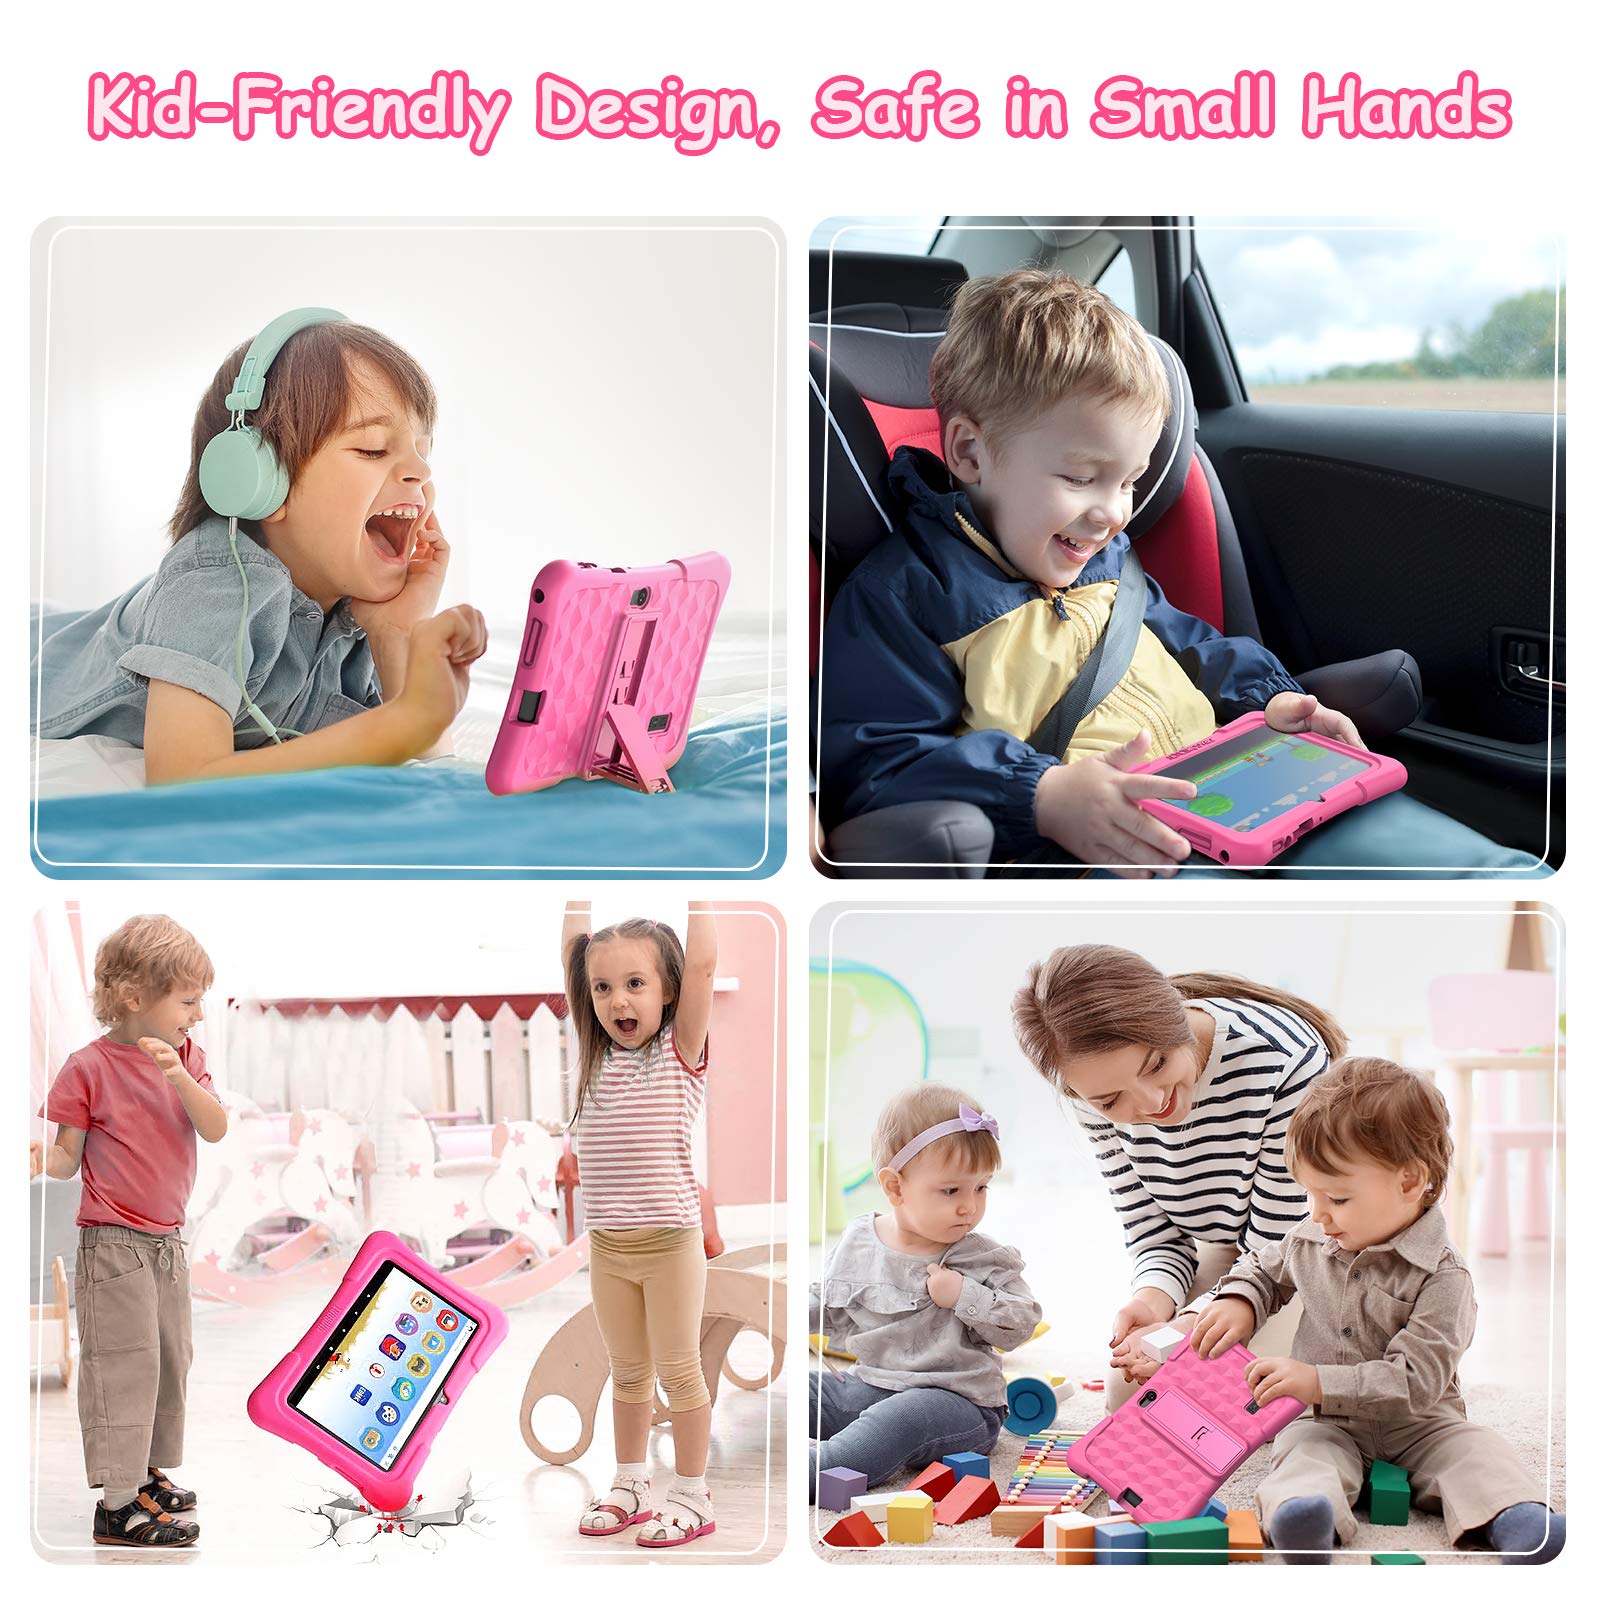 Dragon Touch Kids Tablets with 32GB Storage, 2GB RAM, 7 inch IPS HD Display, Android 12, Quad Core Processor, Kidoz Pre Installed with Kid-Proof Case, Wi-Fi only - Pink